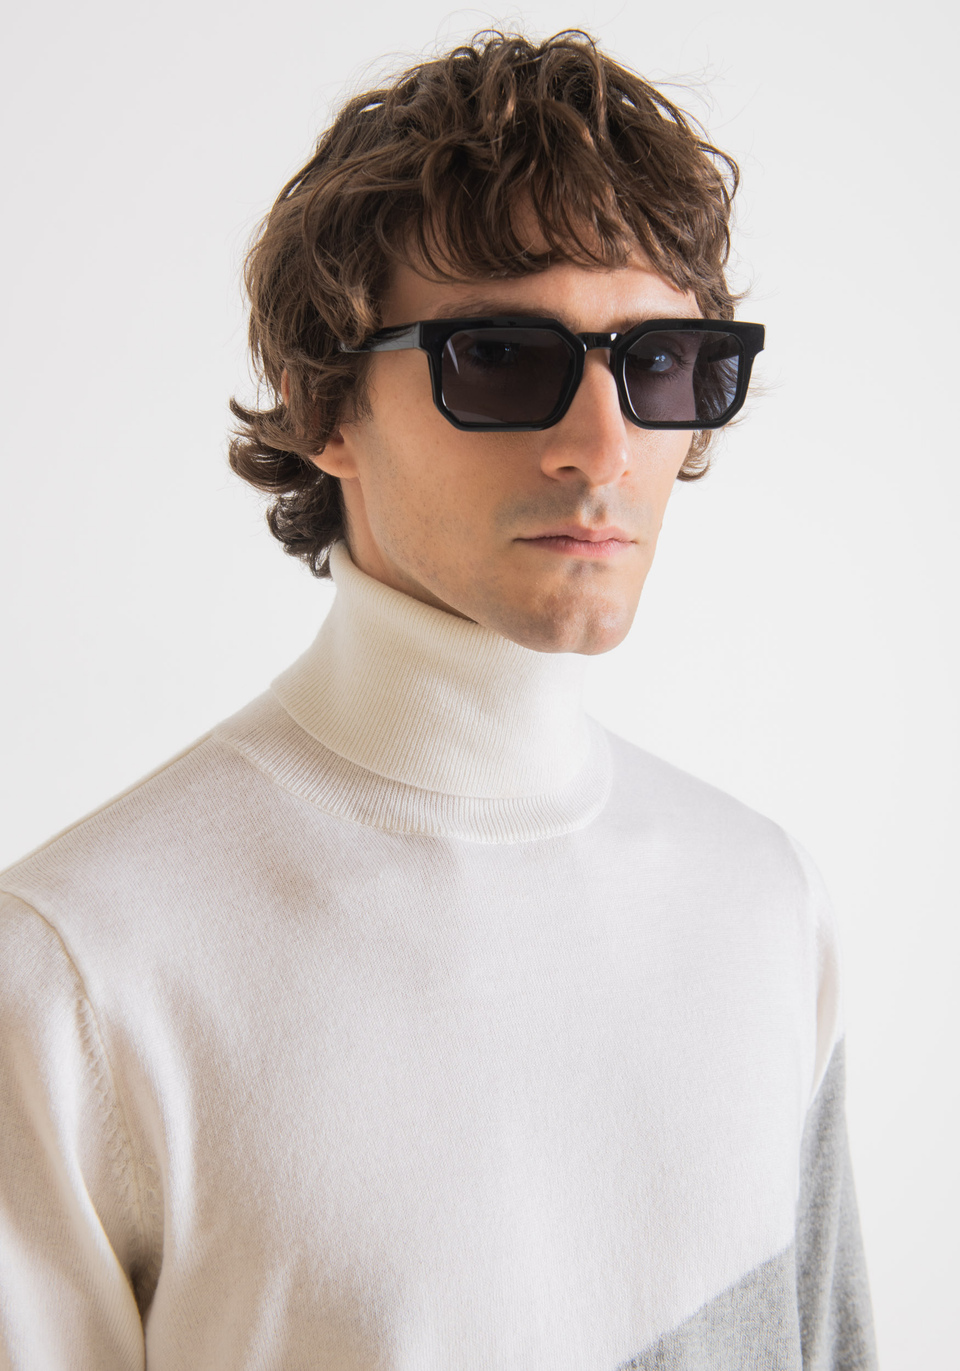 HIGH-NECK SWEATER IN MERINO WOOL BLEND WITH JACQUARD PATTERN - Antony Morato Online Shop